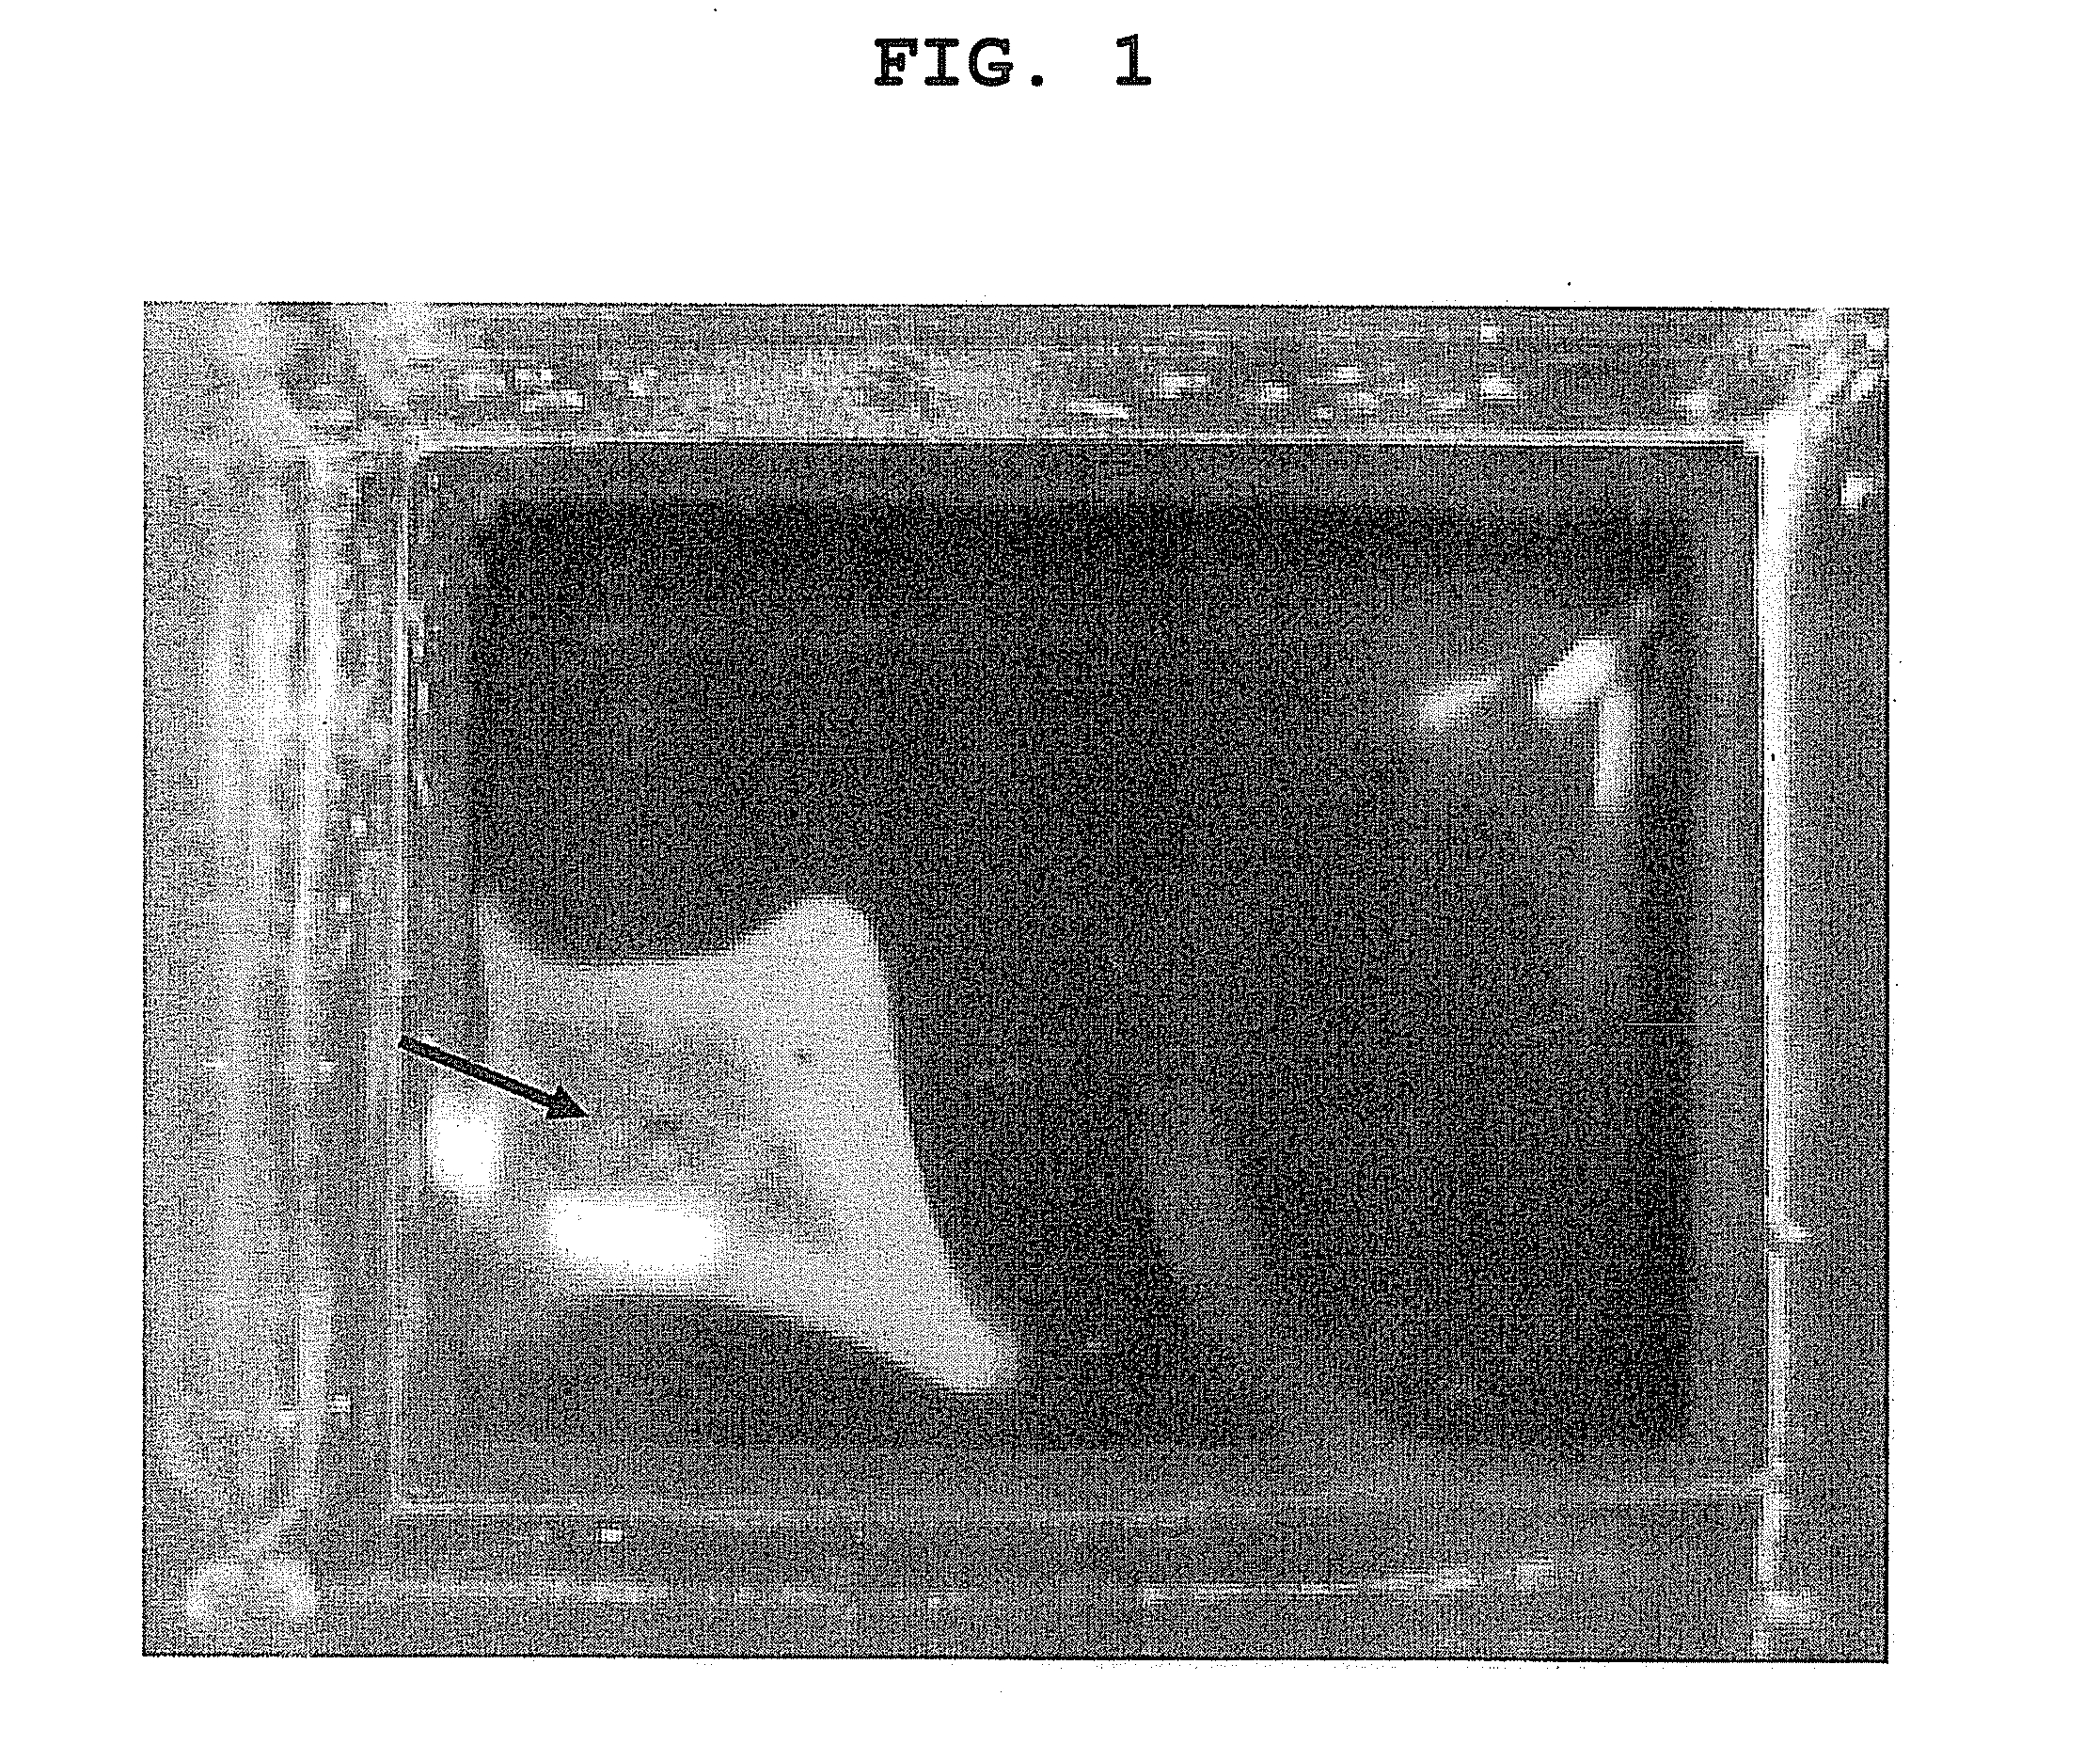 Method for producing cell sheet